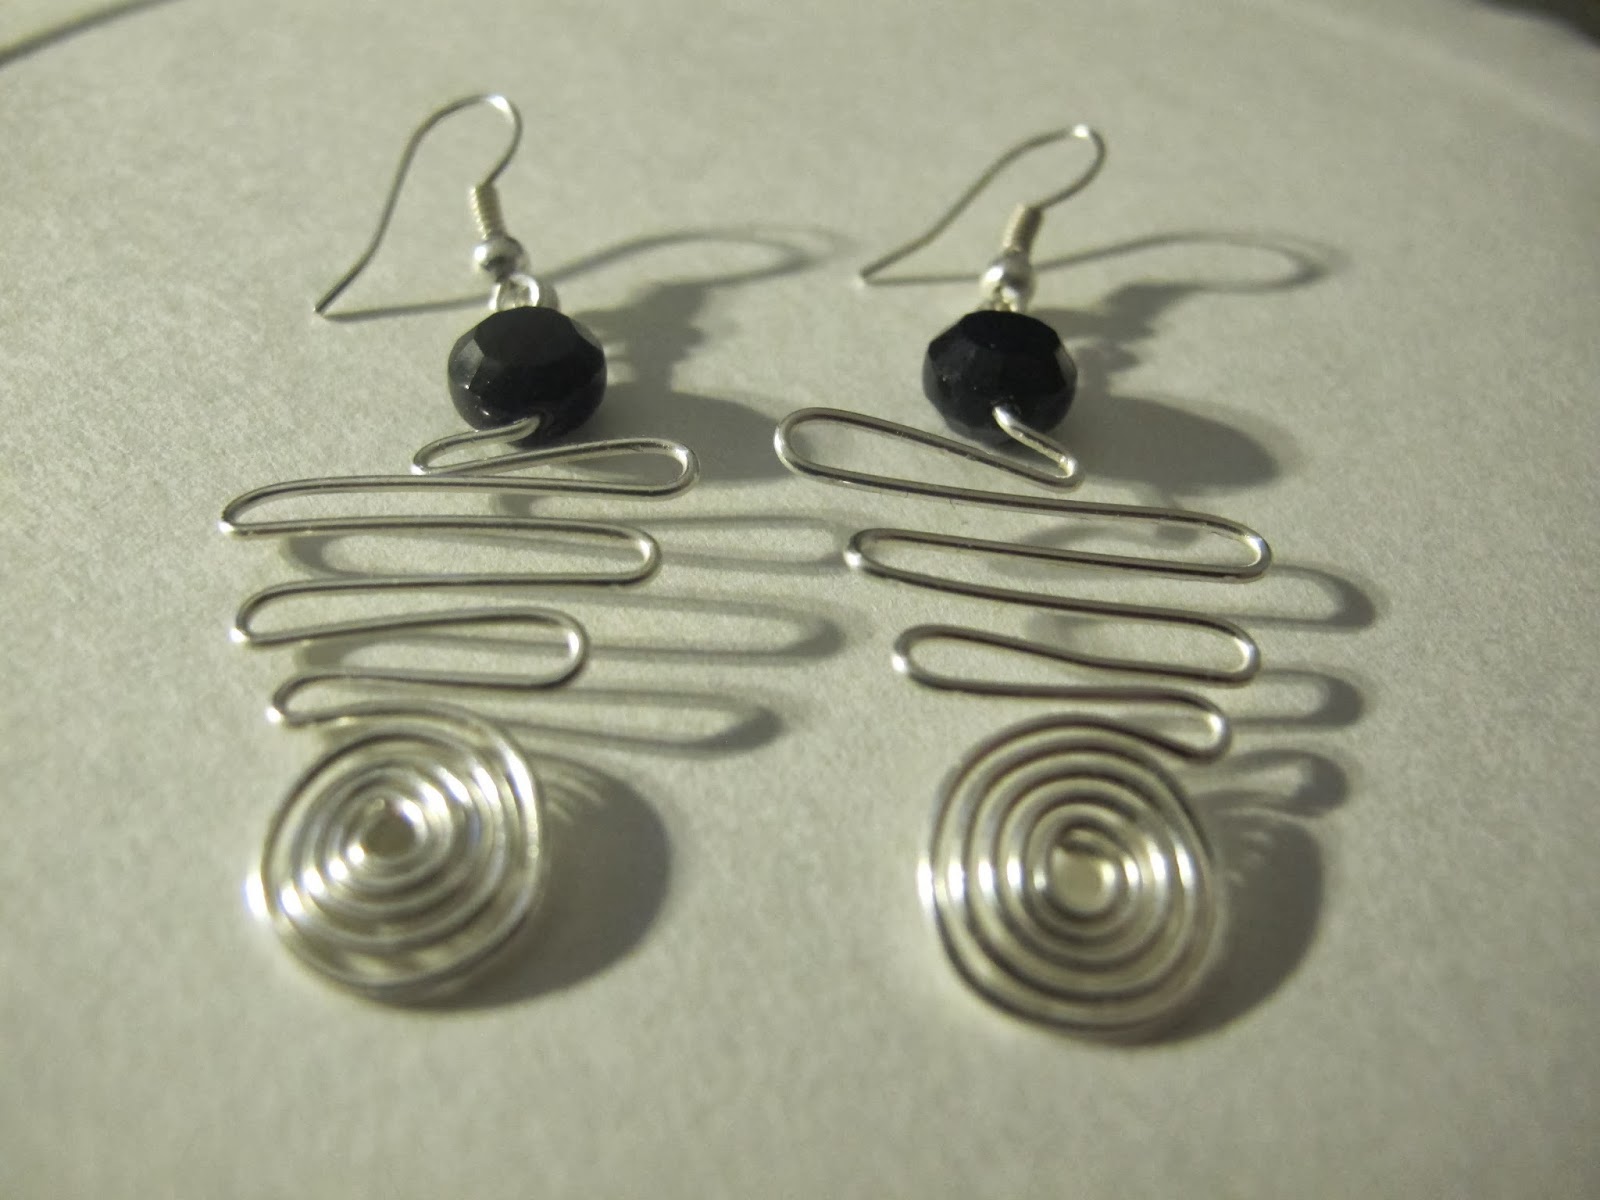 Naomi S Designs Handmade Wire Jewelry New Funky Wire Wrapped Earring